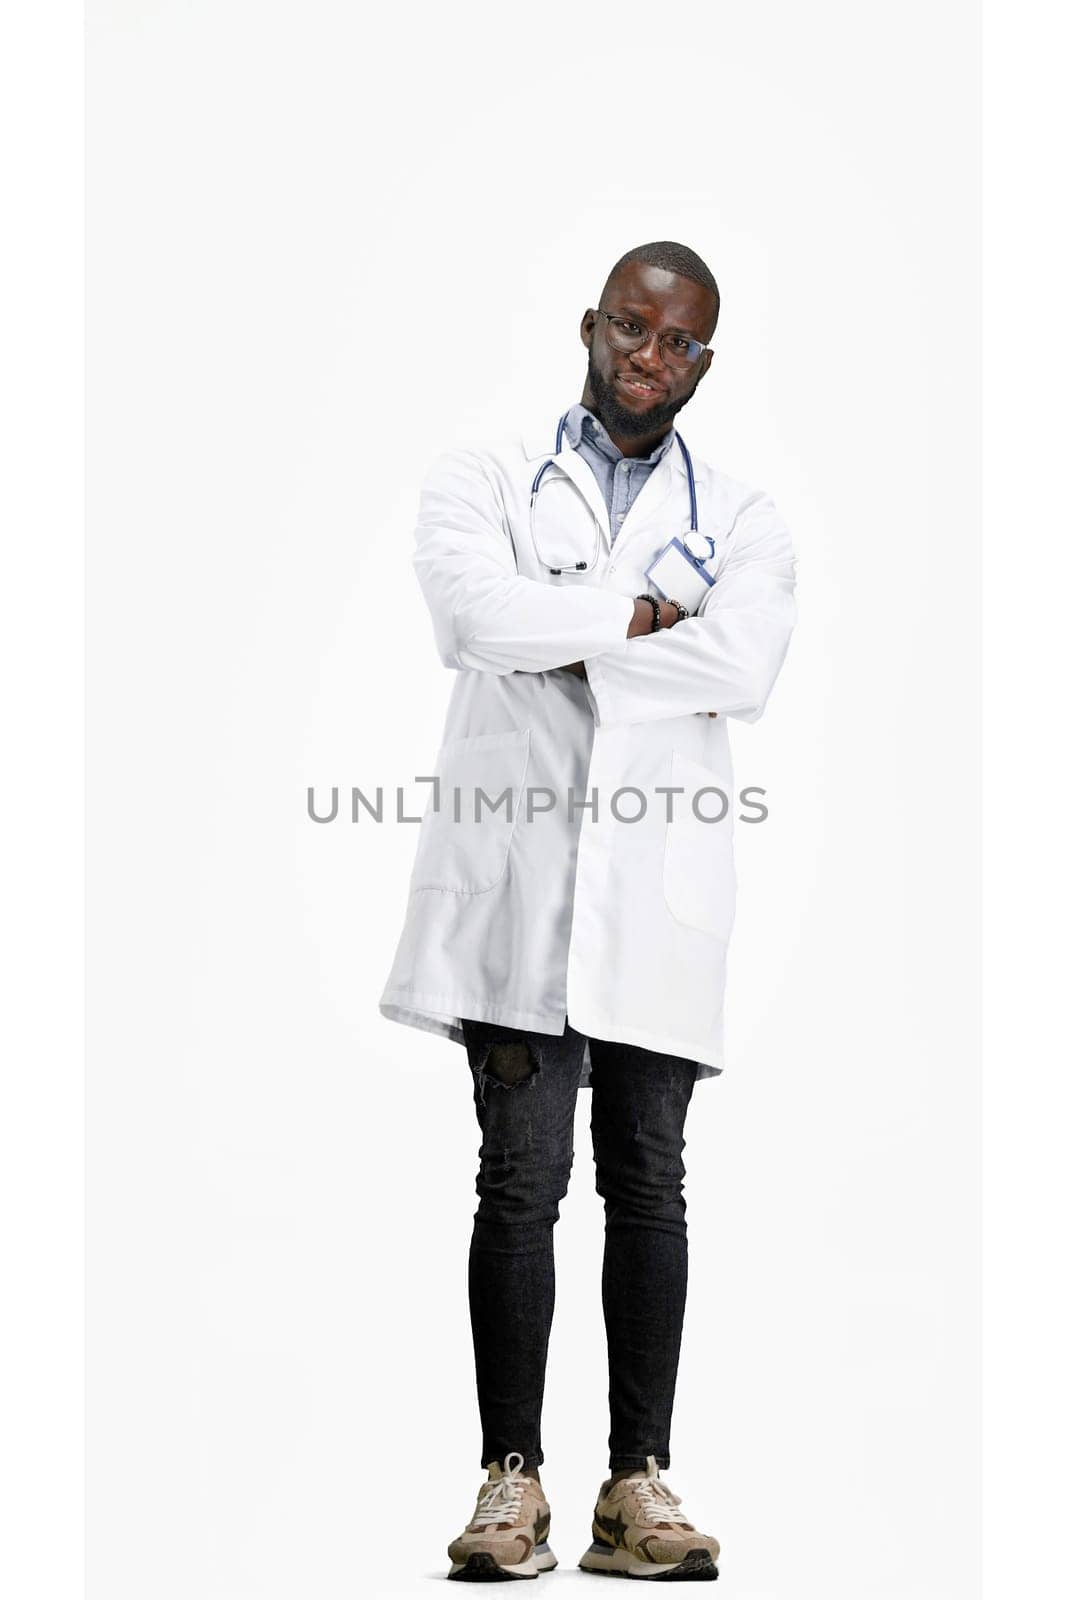 The doctor, in full height, on a white background, crossed his arms.